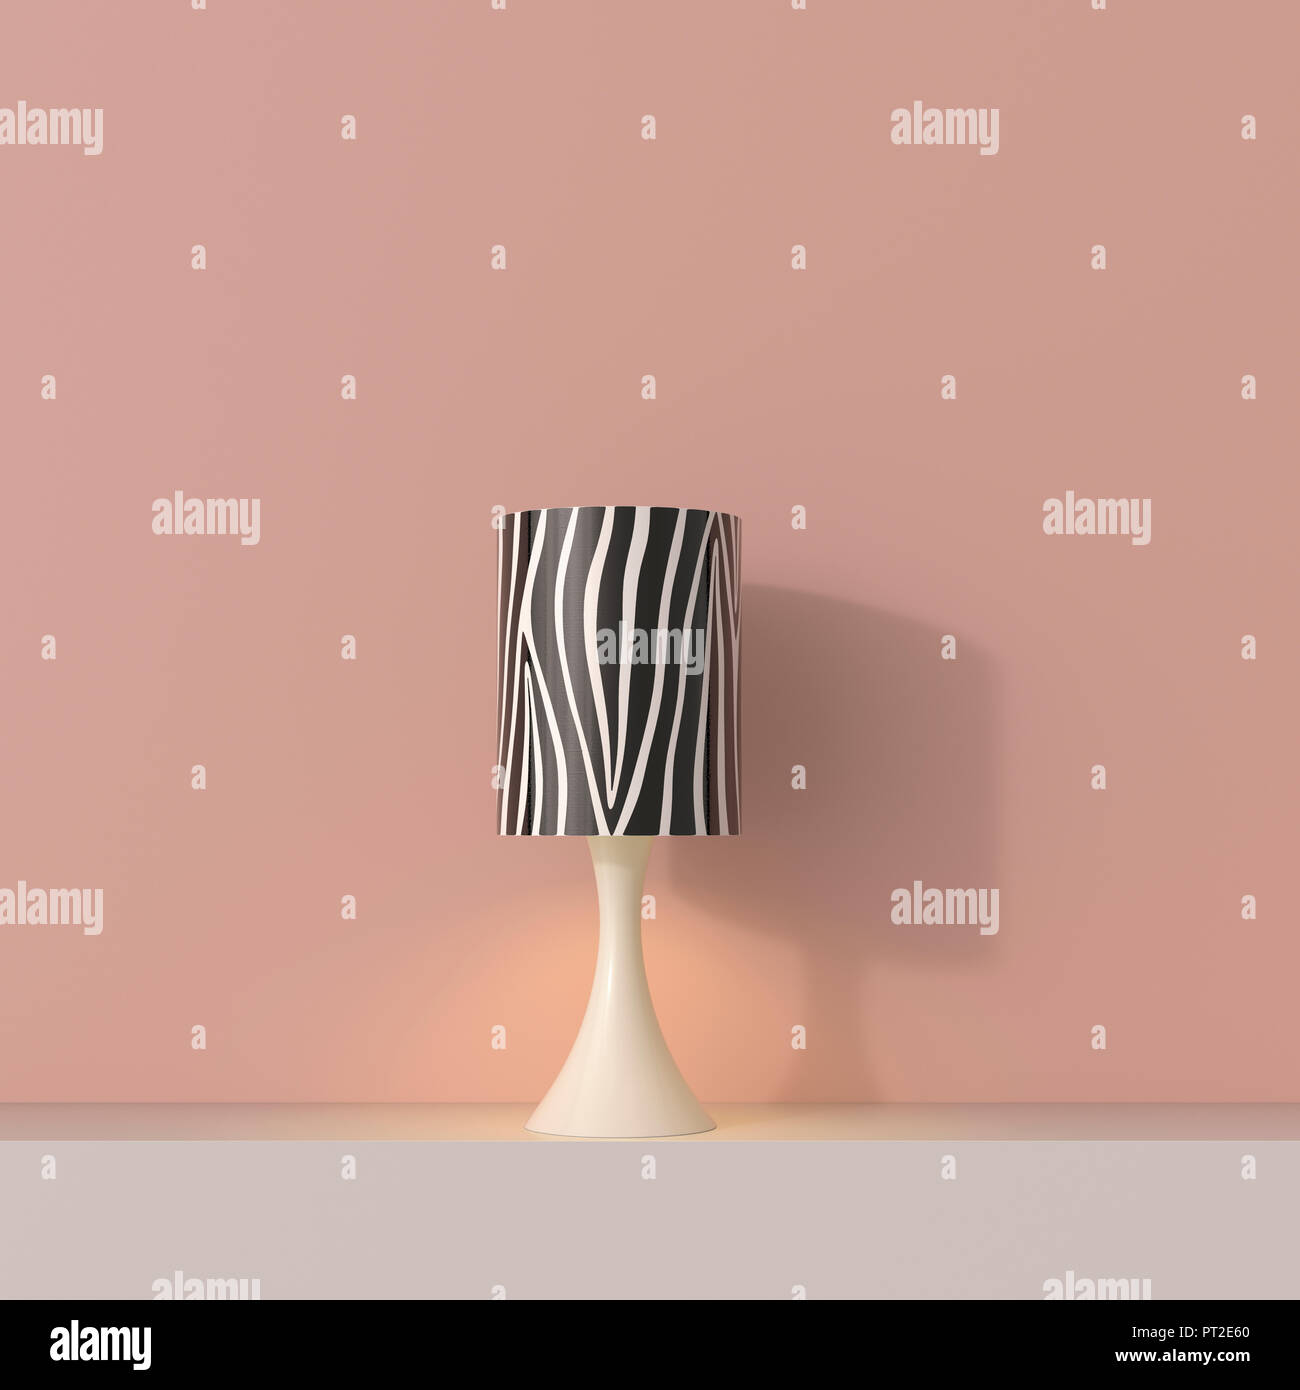 3D rendering, Table lamp on shelf with zebra stripe lampshade Stock Photo